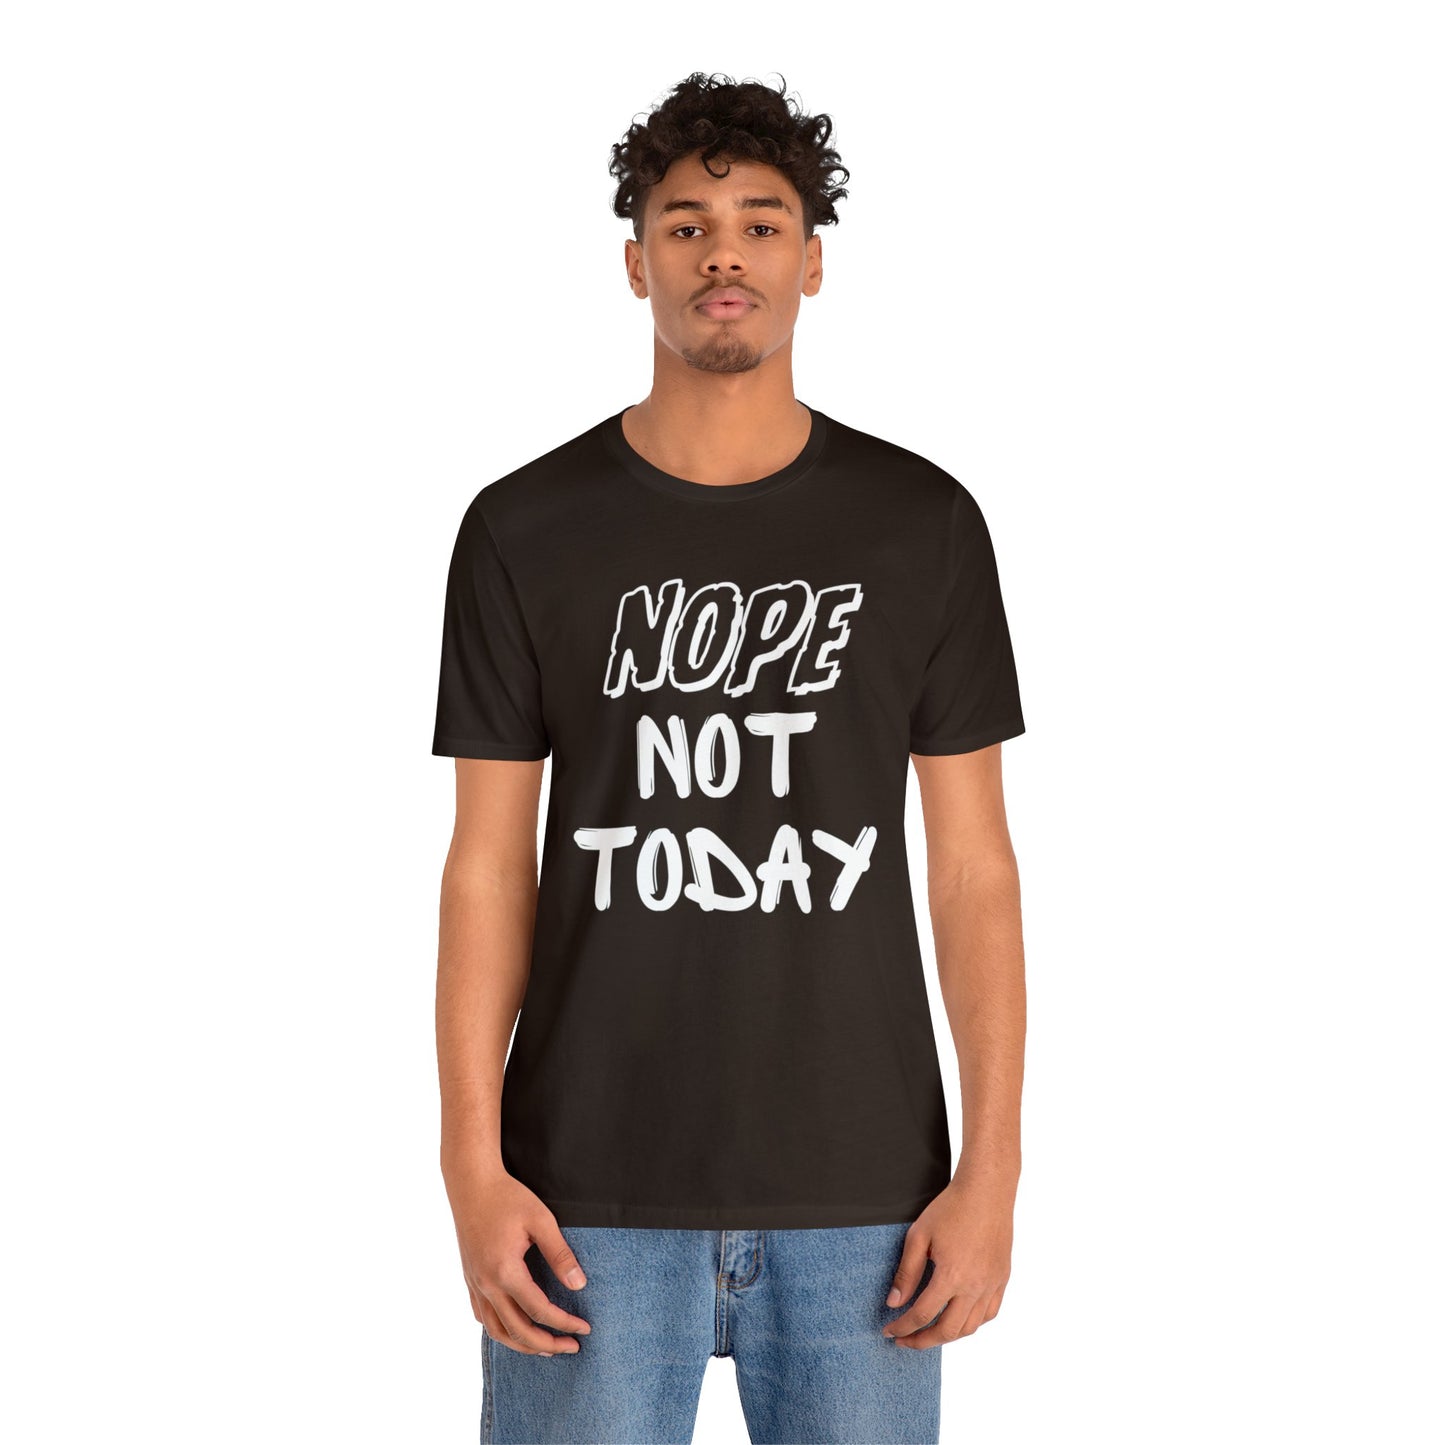 Super Dope Threads -  Nope Not Today